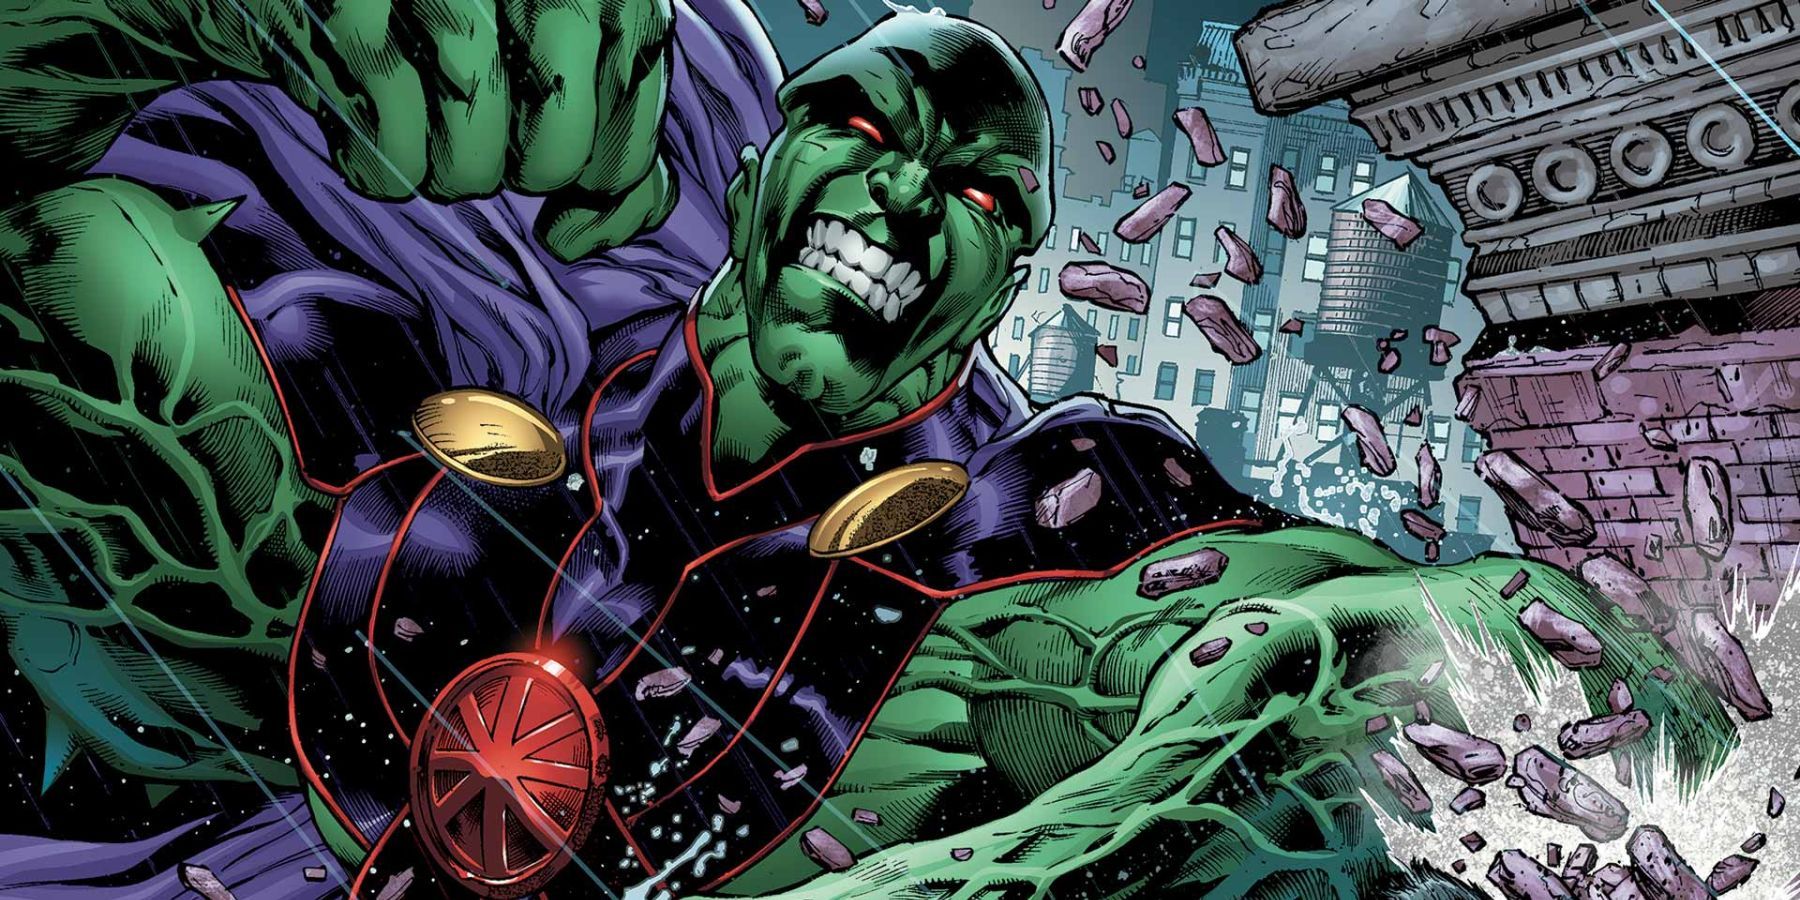 Martian Manhunter in battle, about to throw a punch